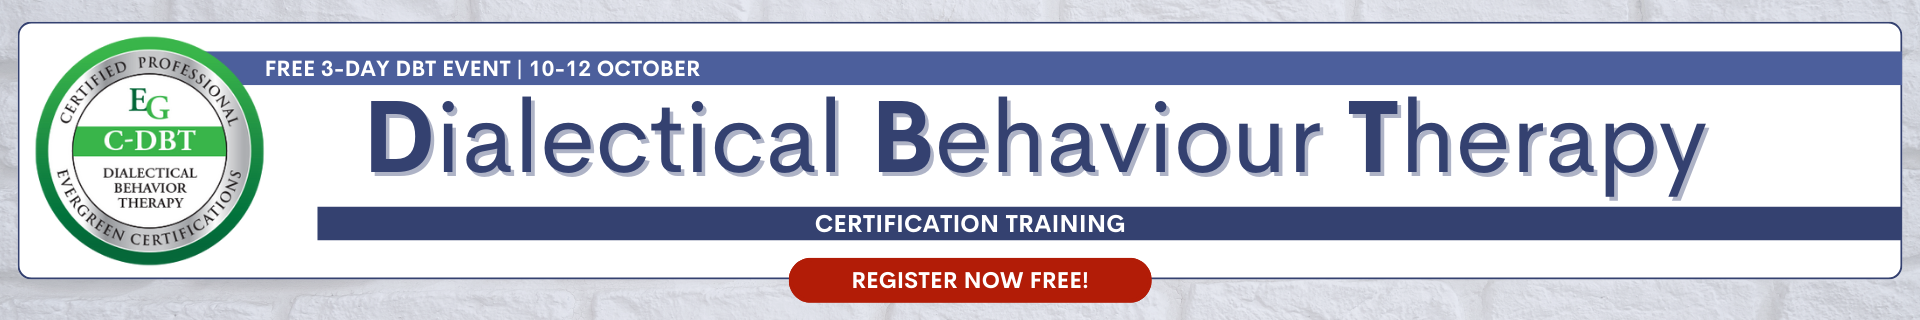 Dialectical Behaviour Therapy (C-DBT) Certification Training: Mastering and integrating DBT and MBT skills in clinical practice